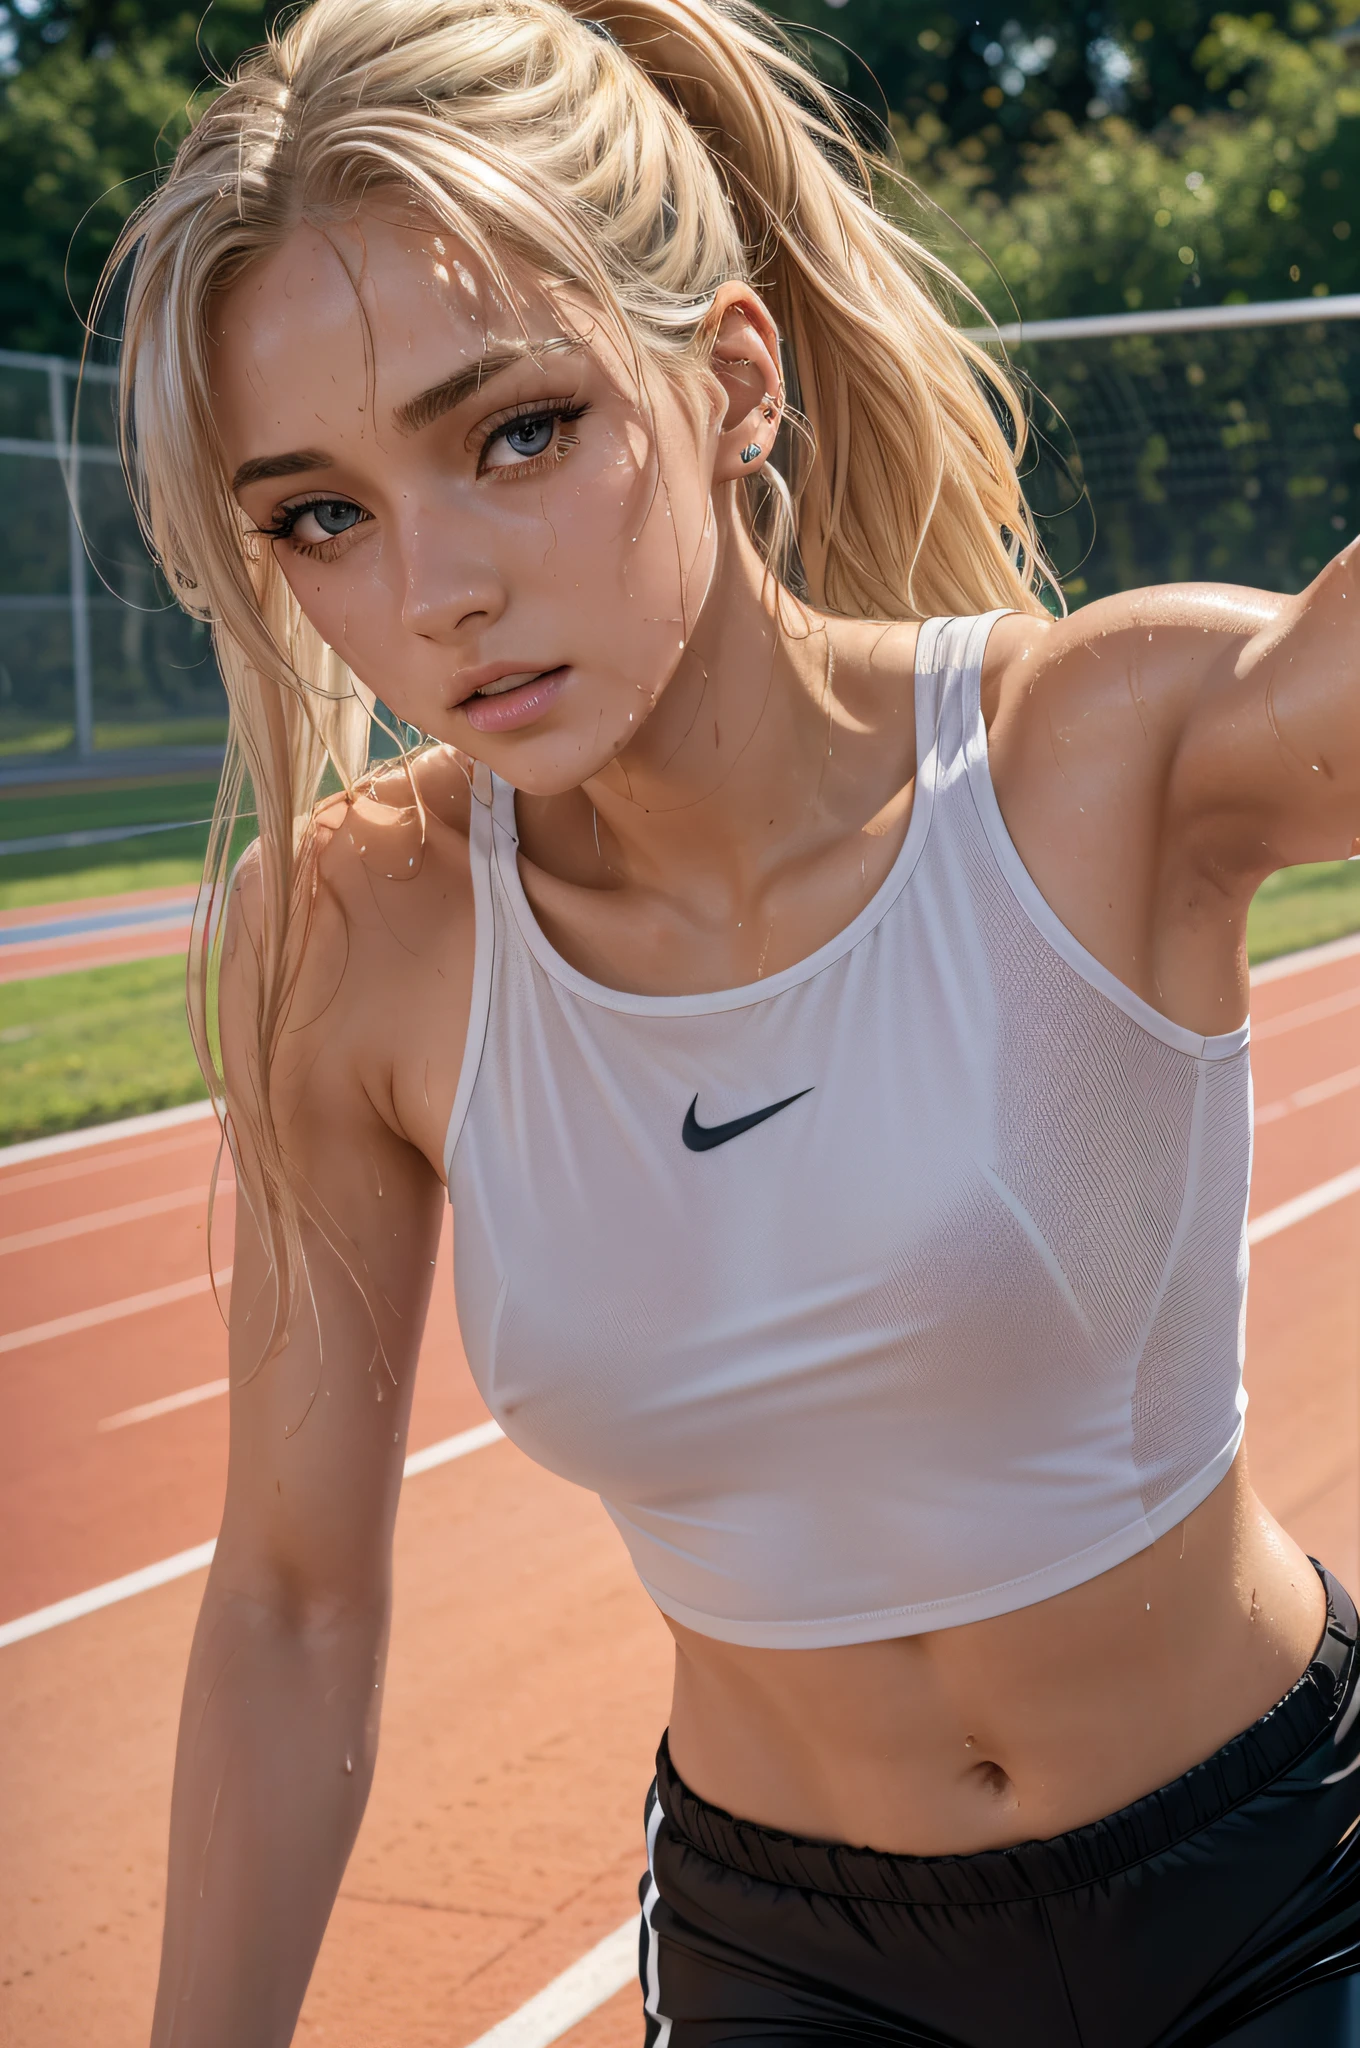 top-quality,in 8K,​masterpiece,超A high resolution,,Raw photo,22-year-old Eastern European woman,ue,a blond,Symmetrical hairstyle,Super beauty,((super realistic details)),Shadow,in 8K,highly intricate detail,Realistic light,CGSoation Trends,Beautiful eyes,radiant eyes,neon details,High background image quality,Full body depiction,,Symmetrical hairstyle with movement,(trance),After sprinting,Land Track,(Wet shirt),((track and field uniform)),Arm muscles,Crying Kuroko,piercings,Running pants